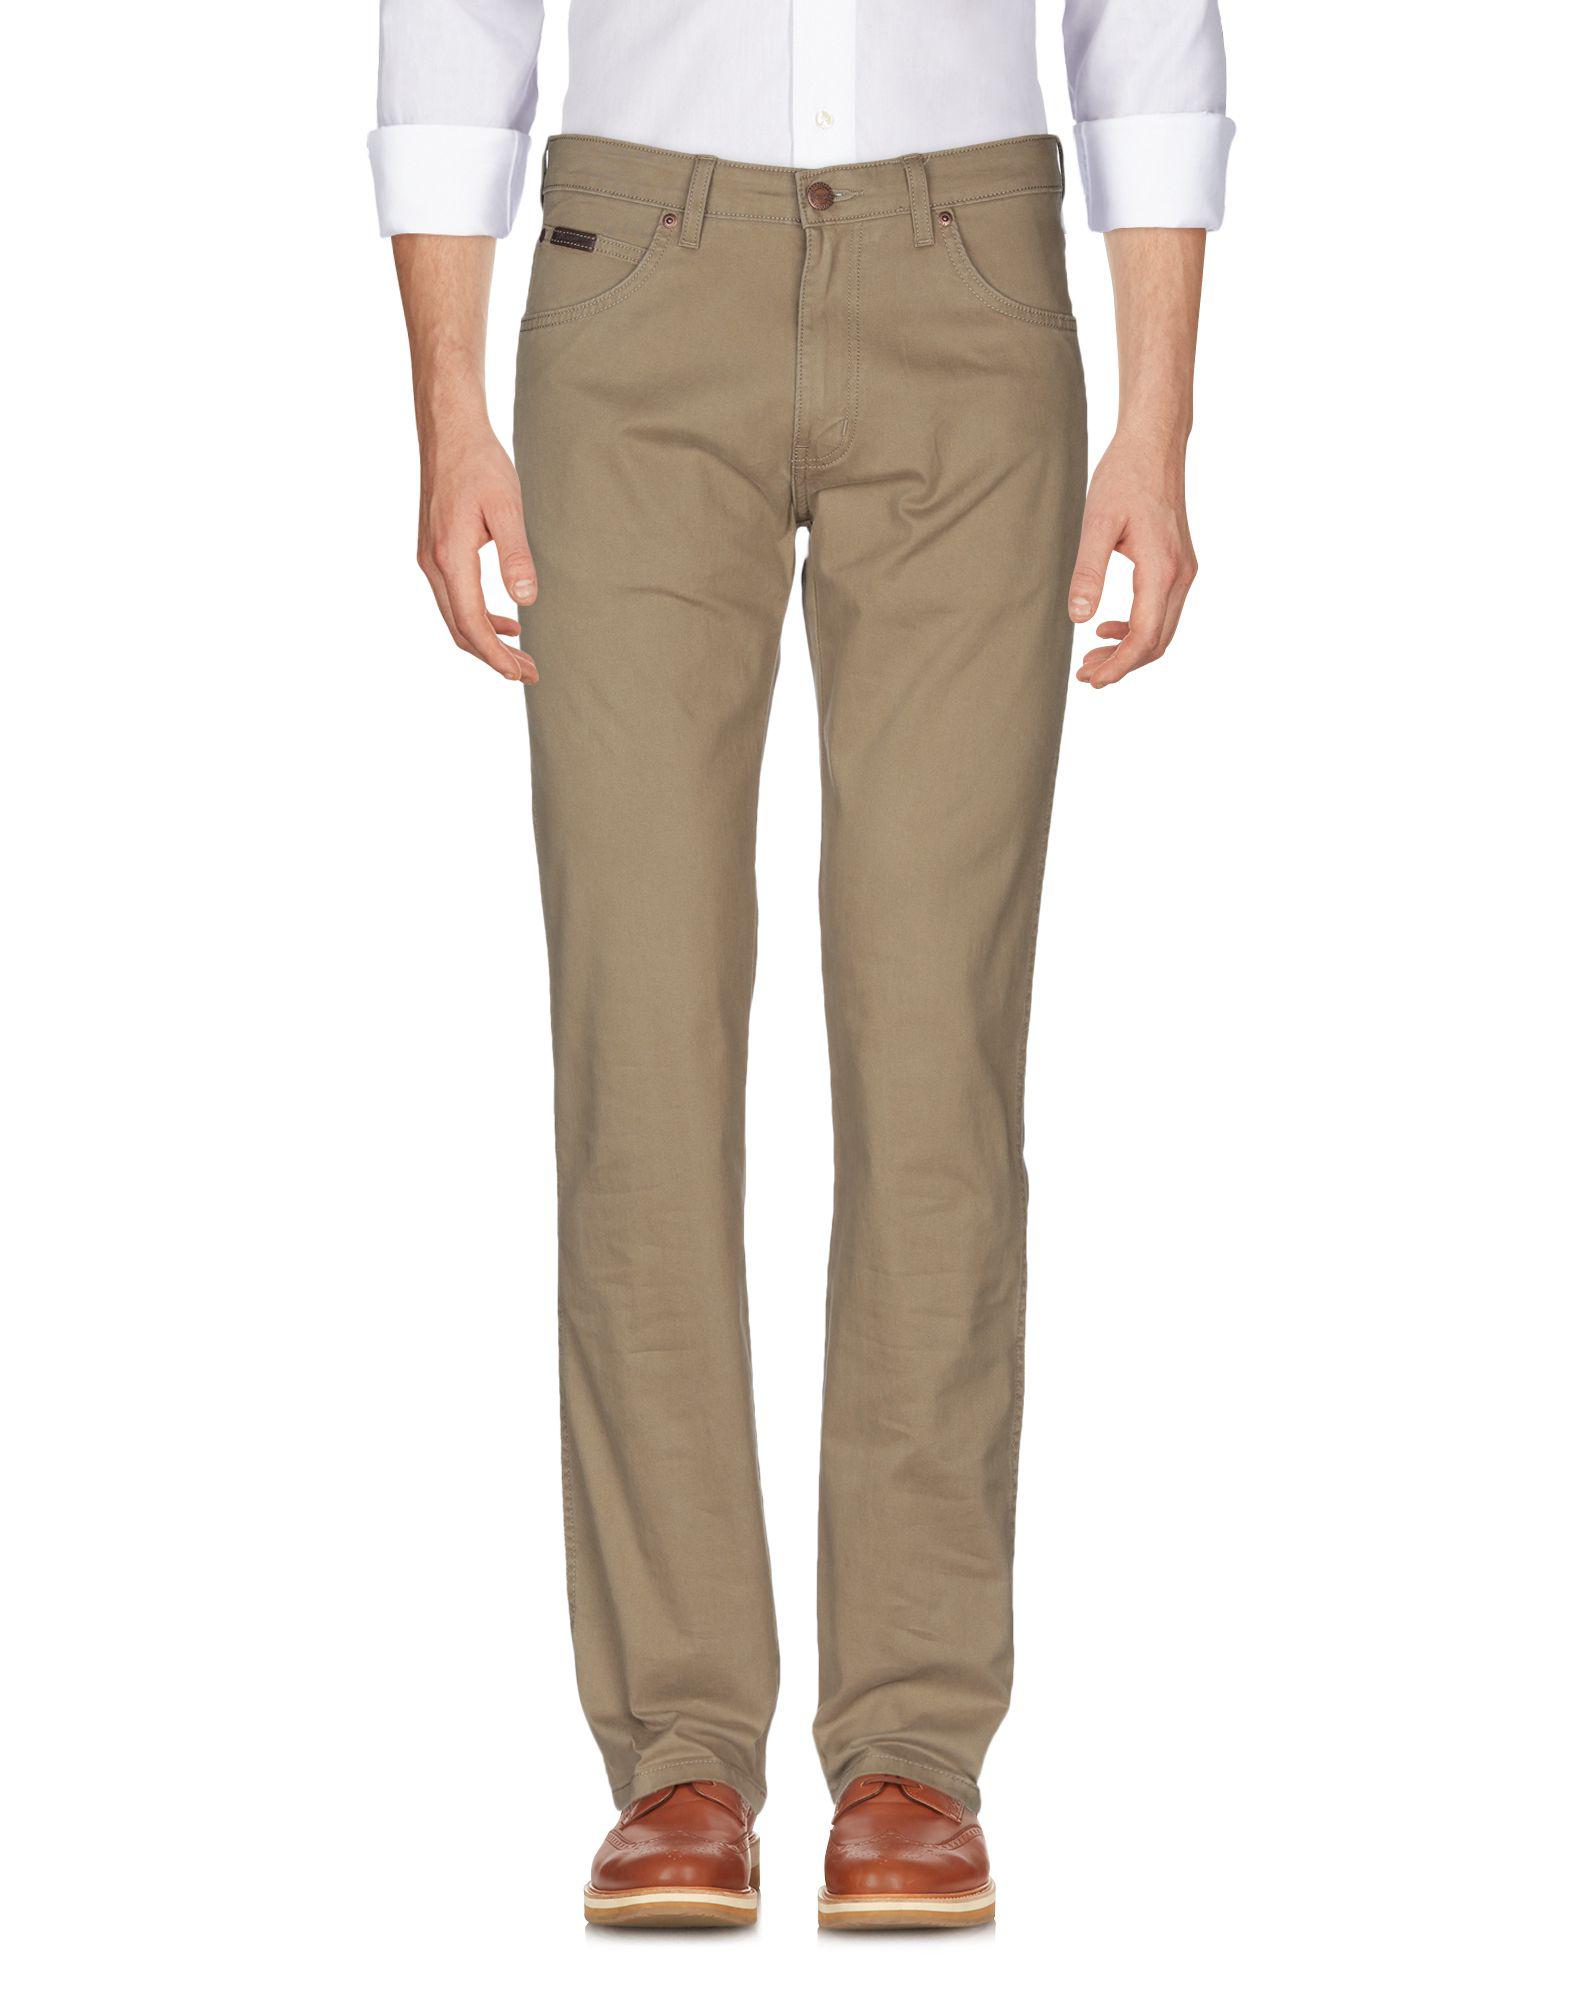 Wrangler Leather Casual Pants in Khaki (Natural) for Men - Lyst